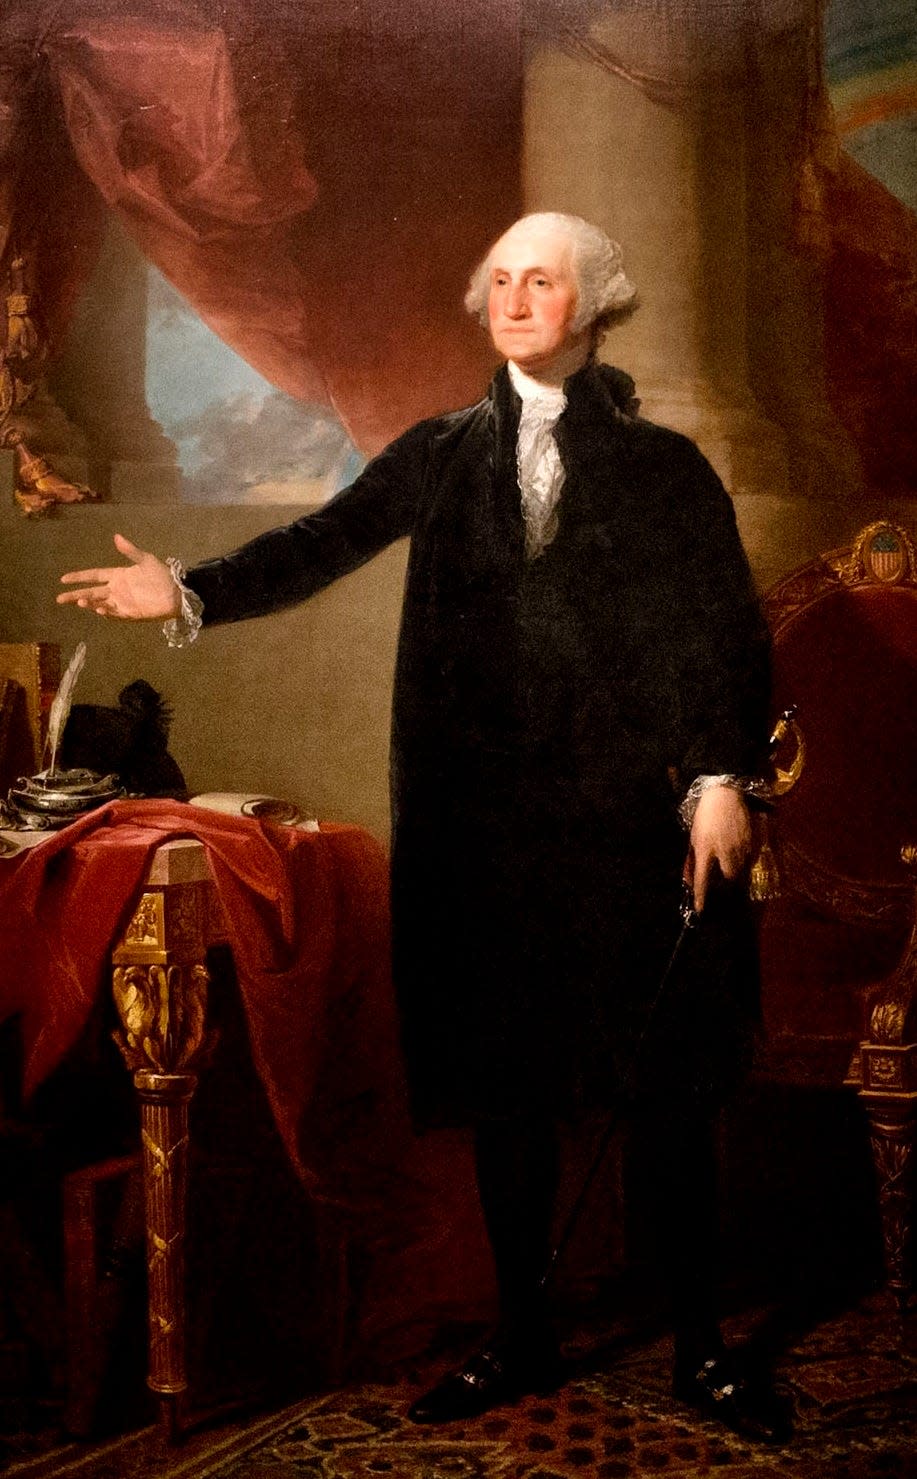 President George Washington warned about the potentially malign influence of political parties on democracy. This painting of Washington by artist Gilbert Stuart from 1796, at the National Portrait Gallery in Washington.